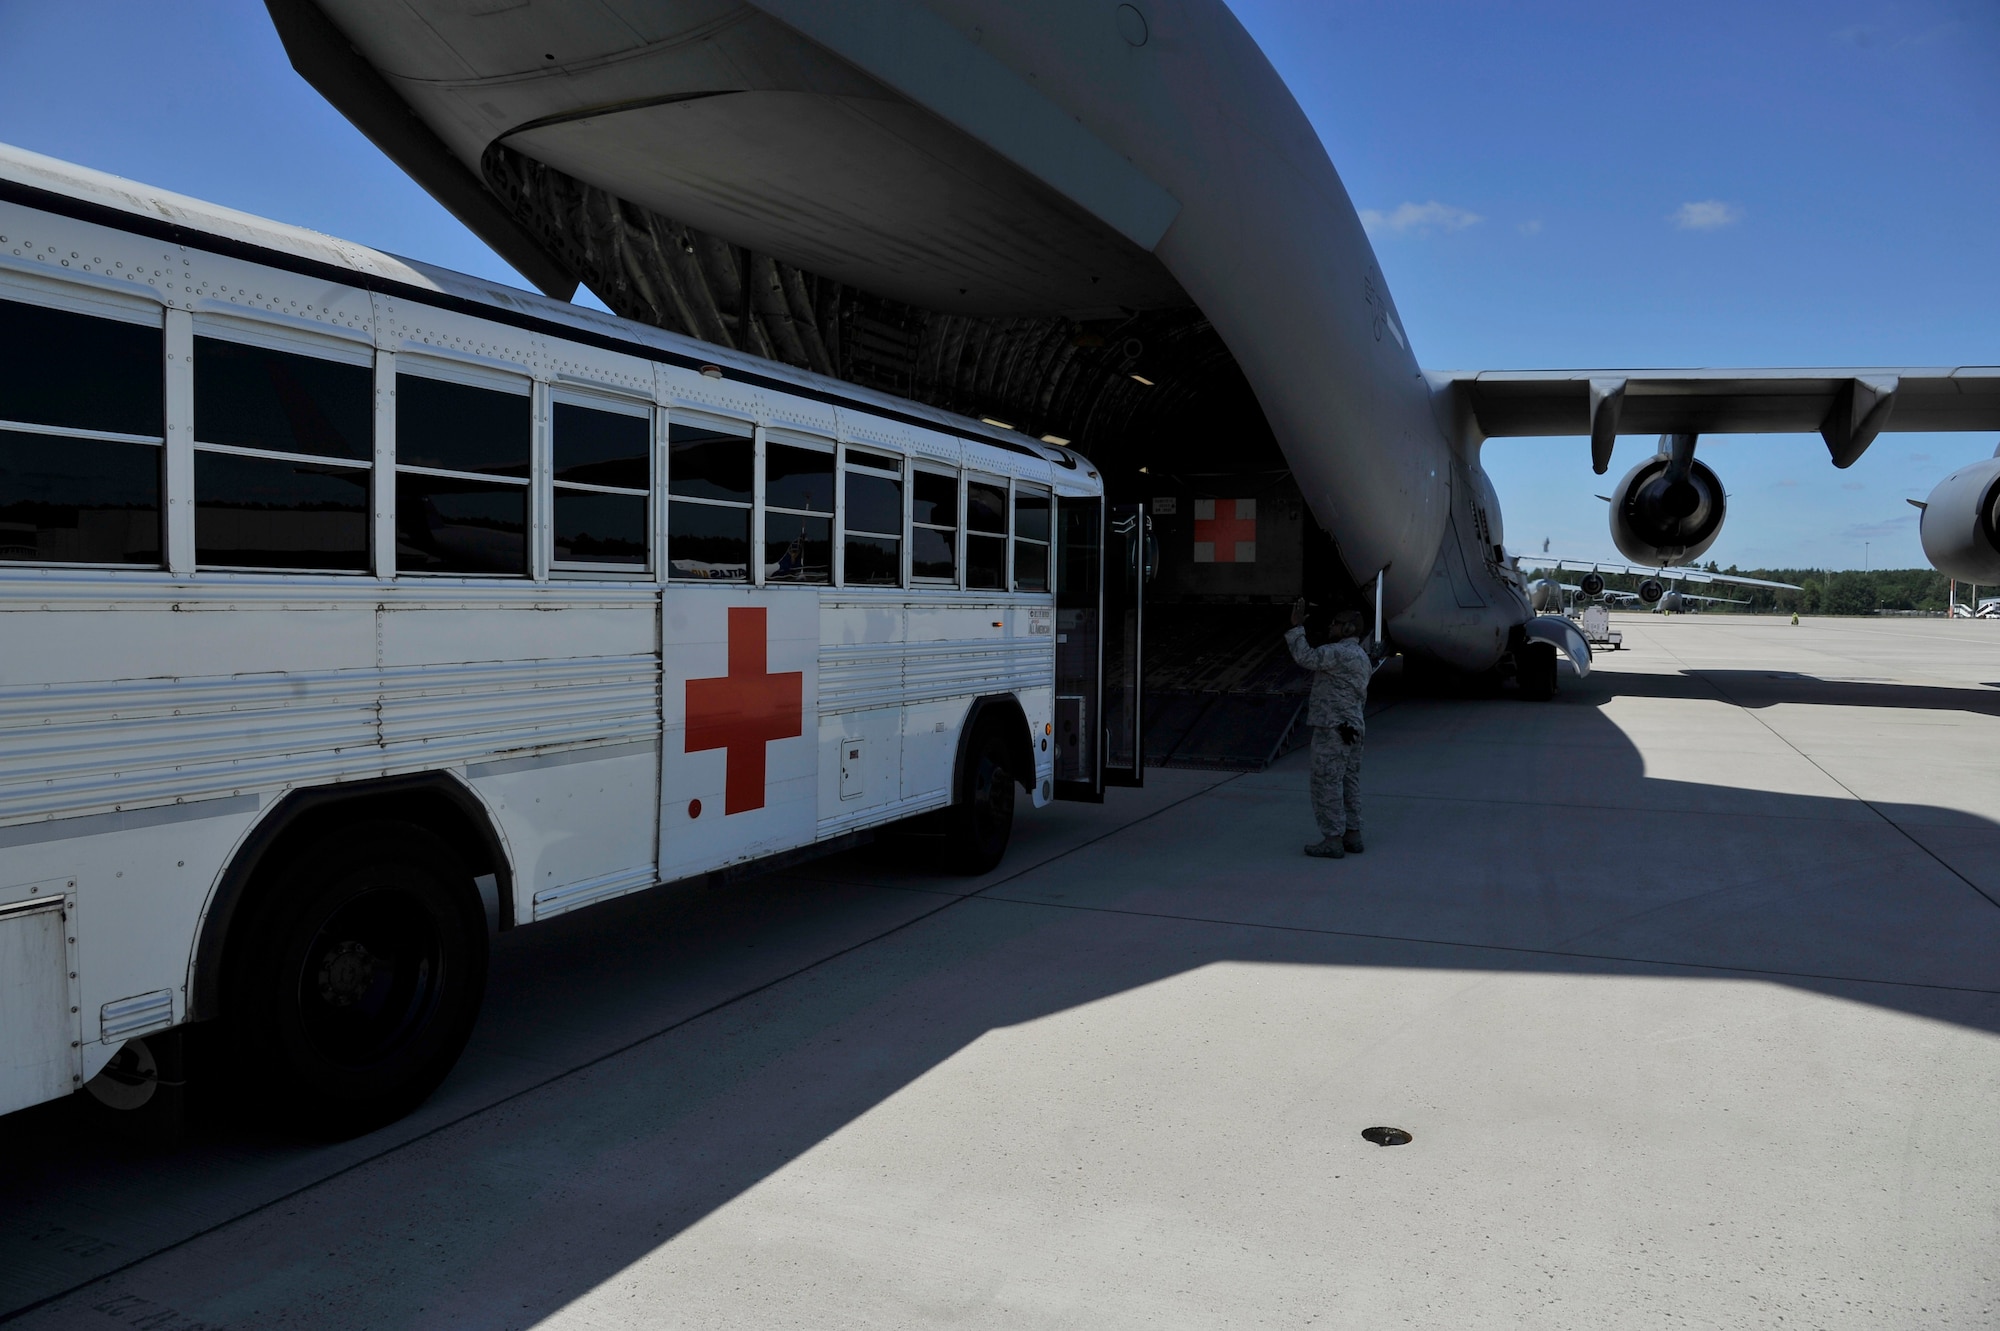 U.S. Air Force Maj. Eric Doggett, En-Route Patient Staging Facility flight commander, speaks to an ambulance bus driver during a patient movement on Ramstein Air Base, Germany, July 13, 2017.  The ERPS primary mission is to care for injured service members in transit from deployed locations to the continental United States where they can receive higher levels of care. (U.S. Air Force photo by Airman 1st Class D. Blake Browning)